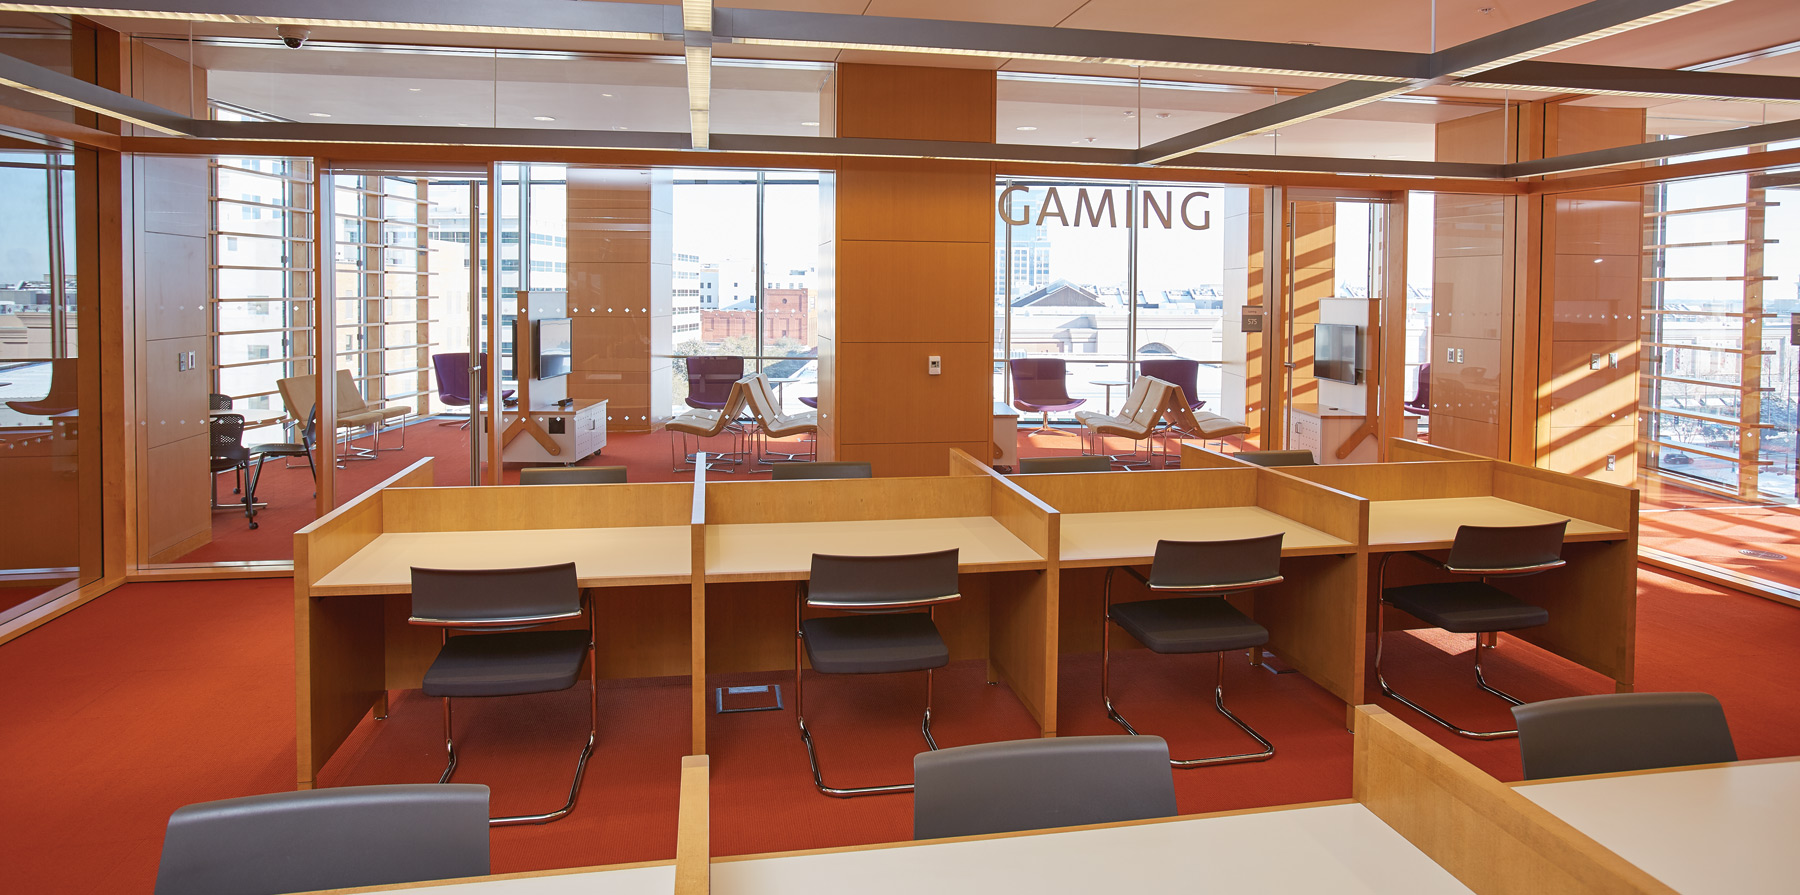 Slover Library - Gaming Area